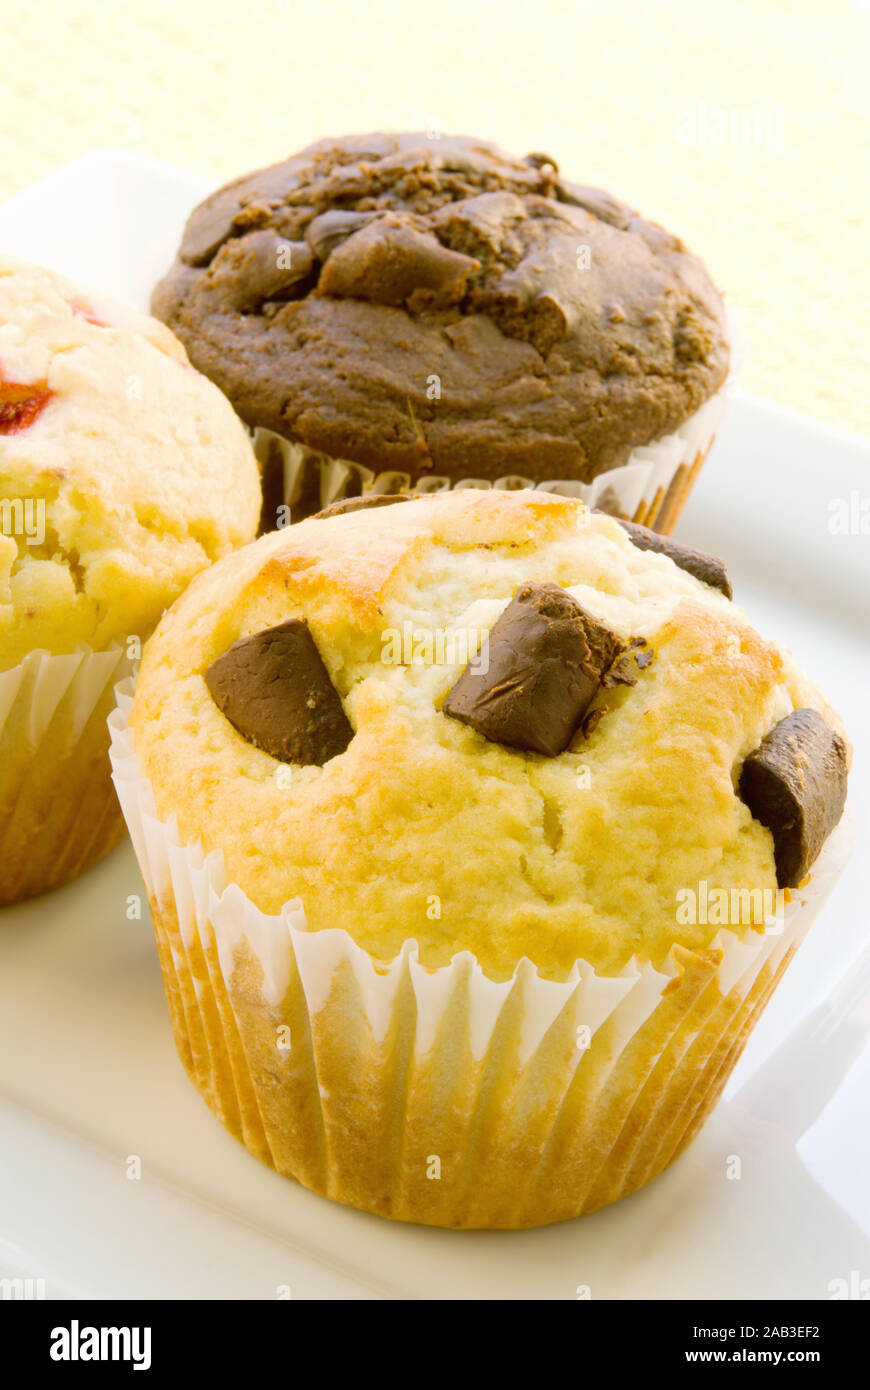 Homemade jumbo sized breakfast muffins. Included in the assortment are chocolate chip and chocolate marshmallow and buttermilk strawberry items. Stock Photo